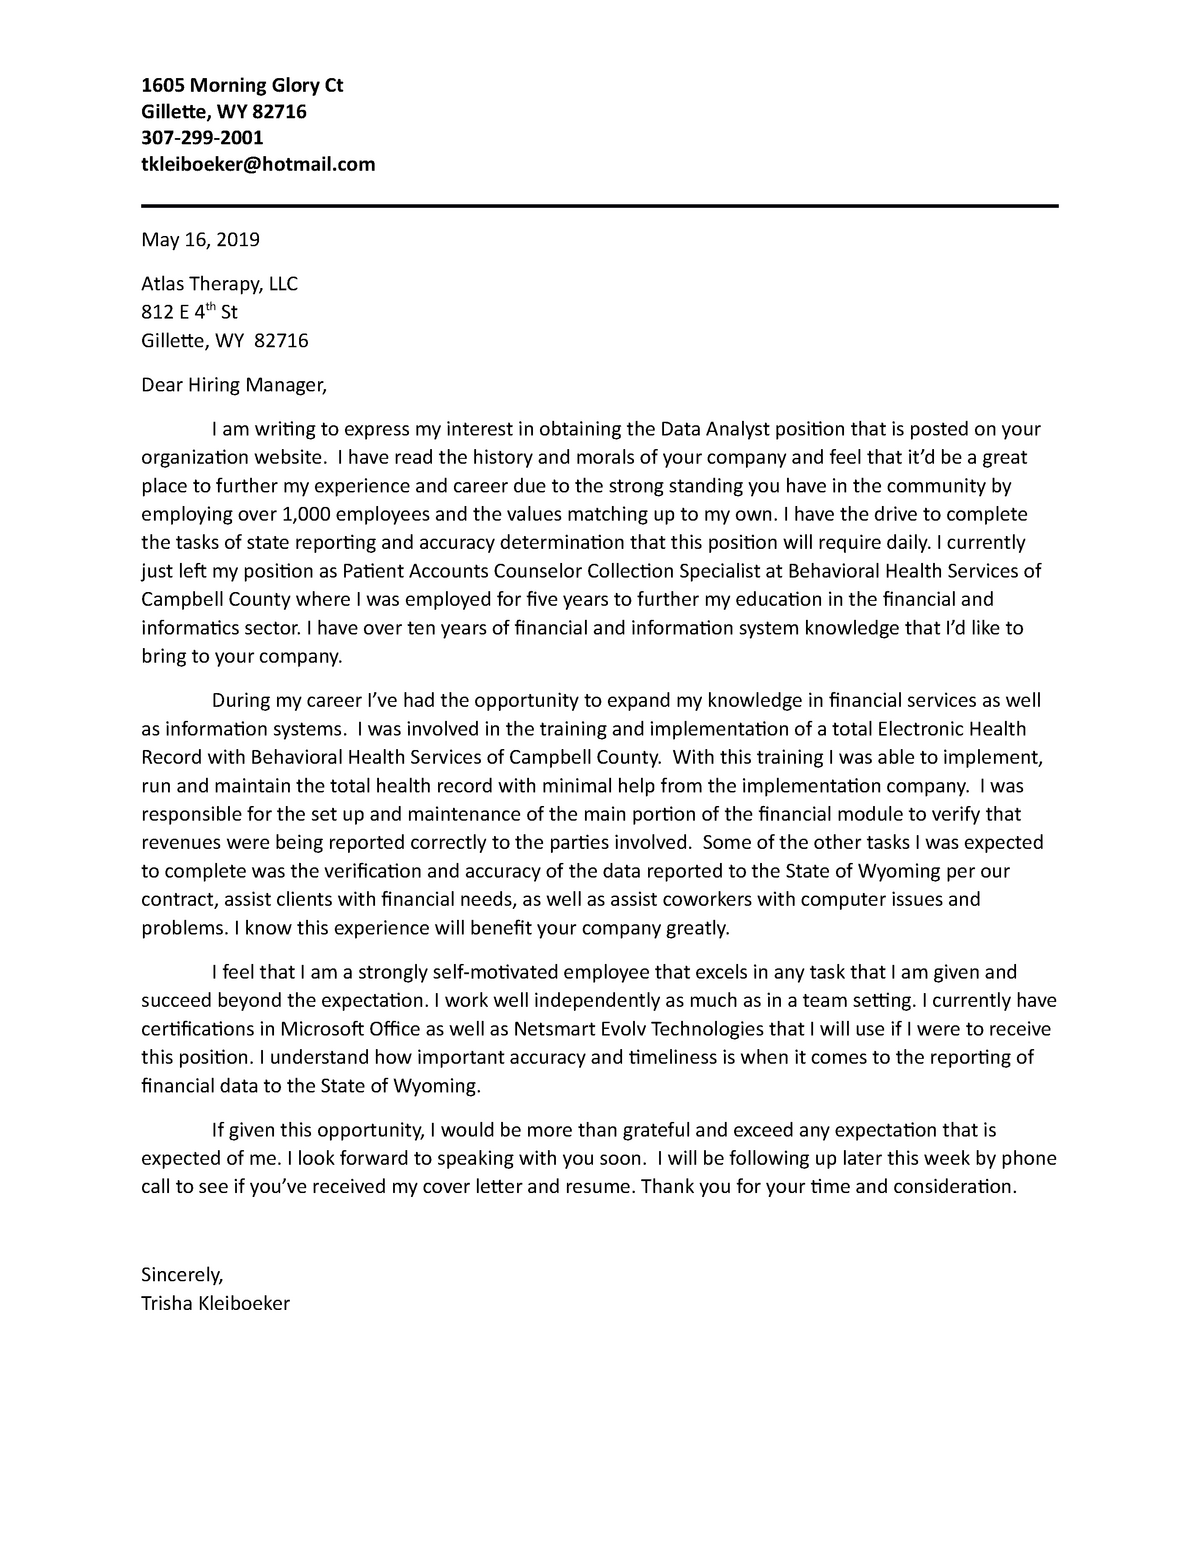 cover letter in business communication